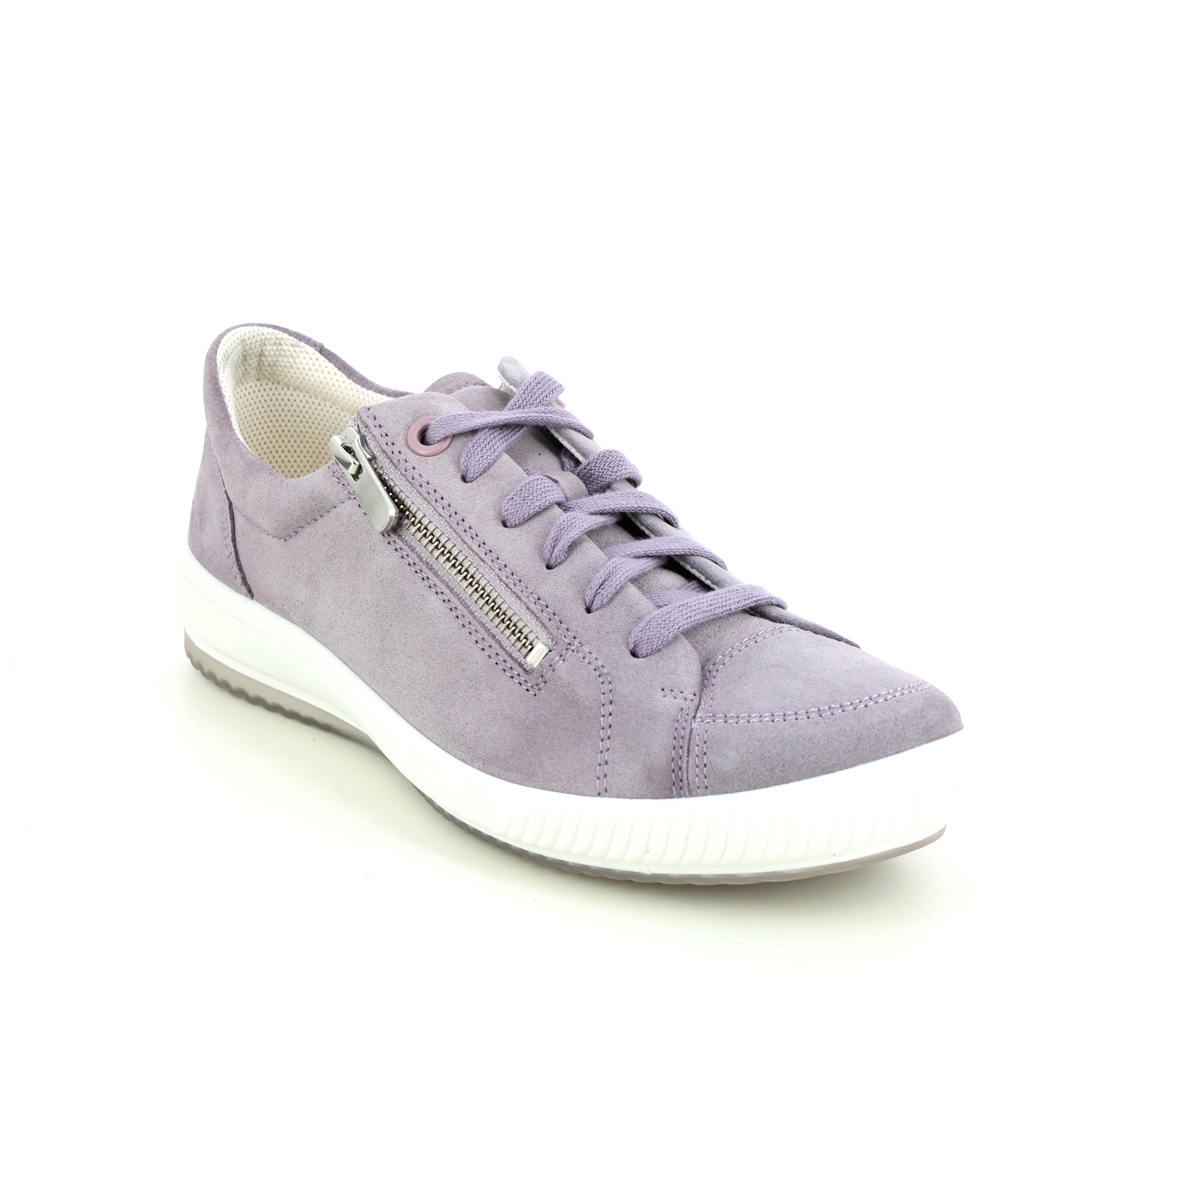 Legero Tanaro 5 Zip Lilac Womens Lacing Shoes 2000162-8530 In Size 5 In Plain Lilac